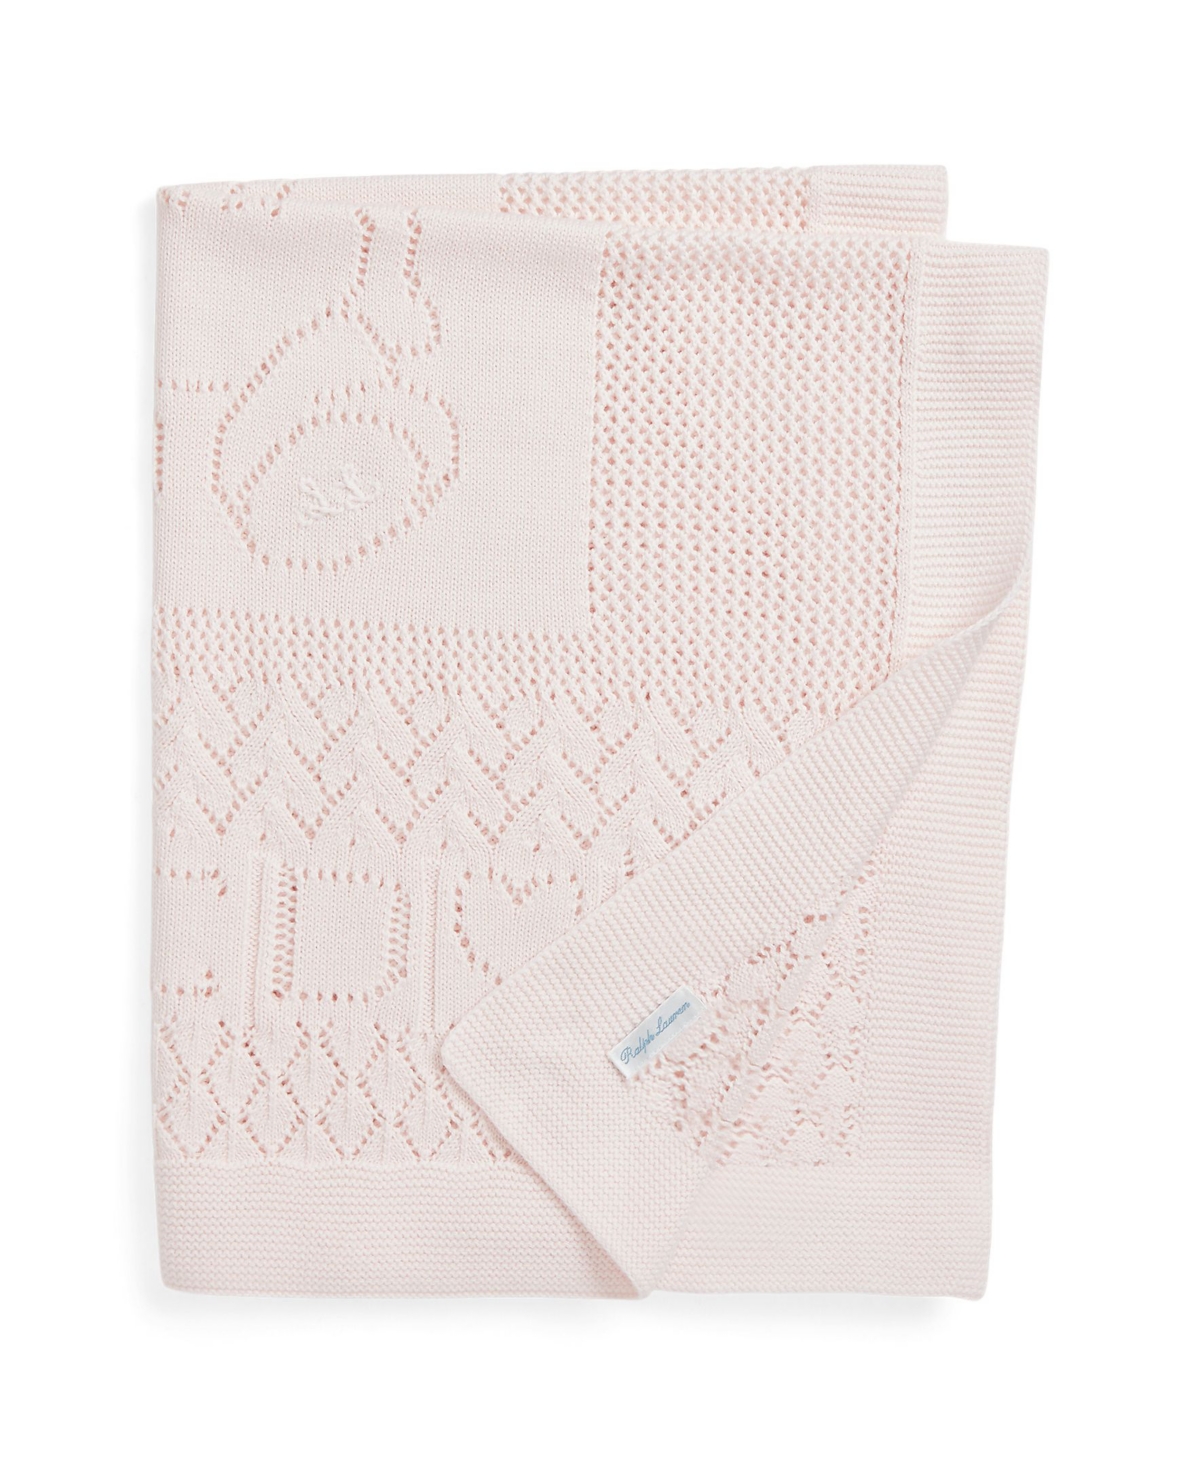 Polo Ralph Lauren Baby Boys Or Girls Pointelle Knit Cotton Blanket In Delicate Pink